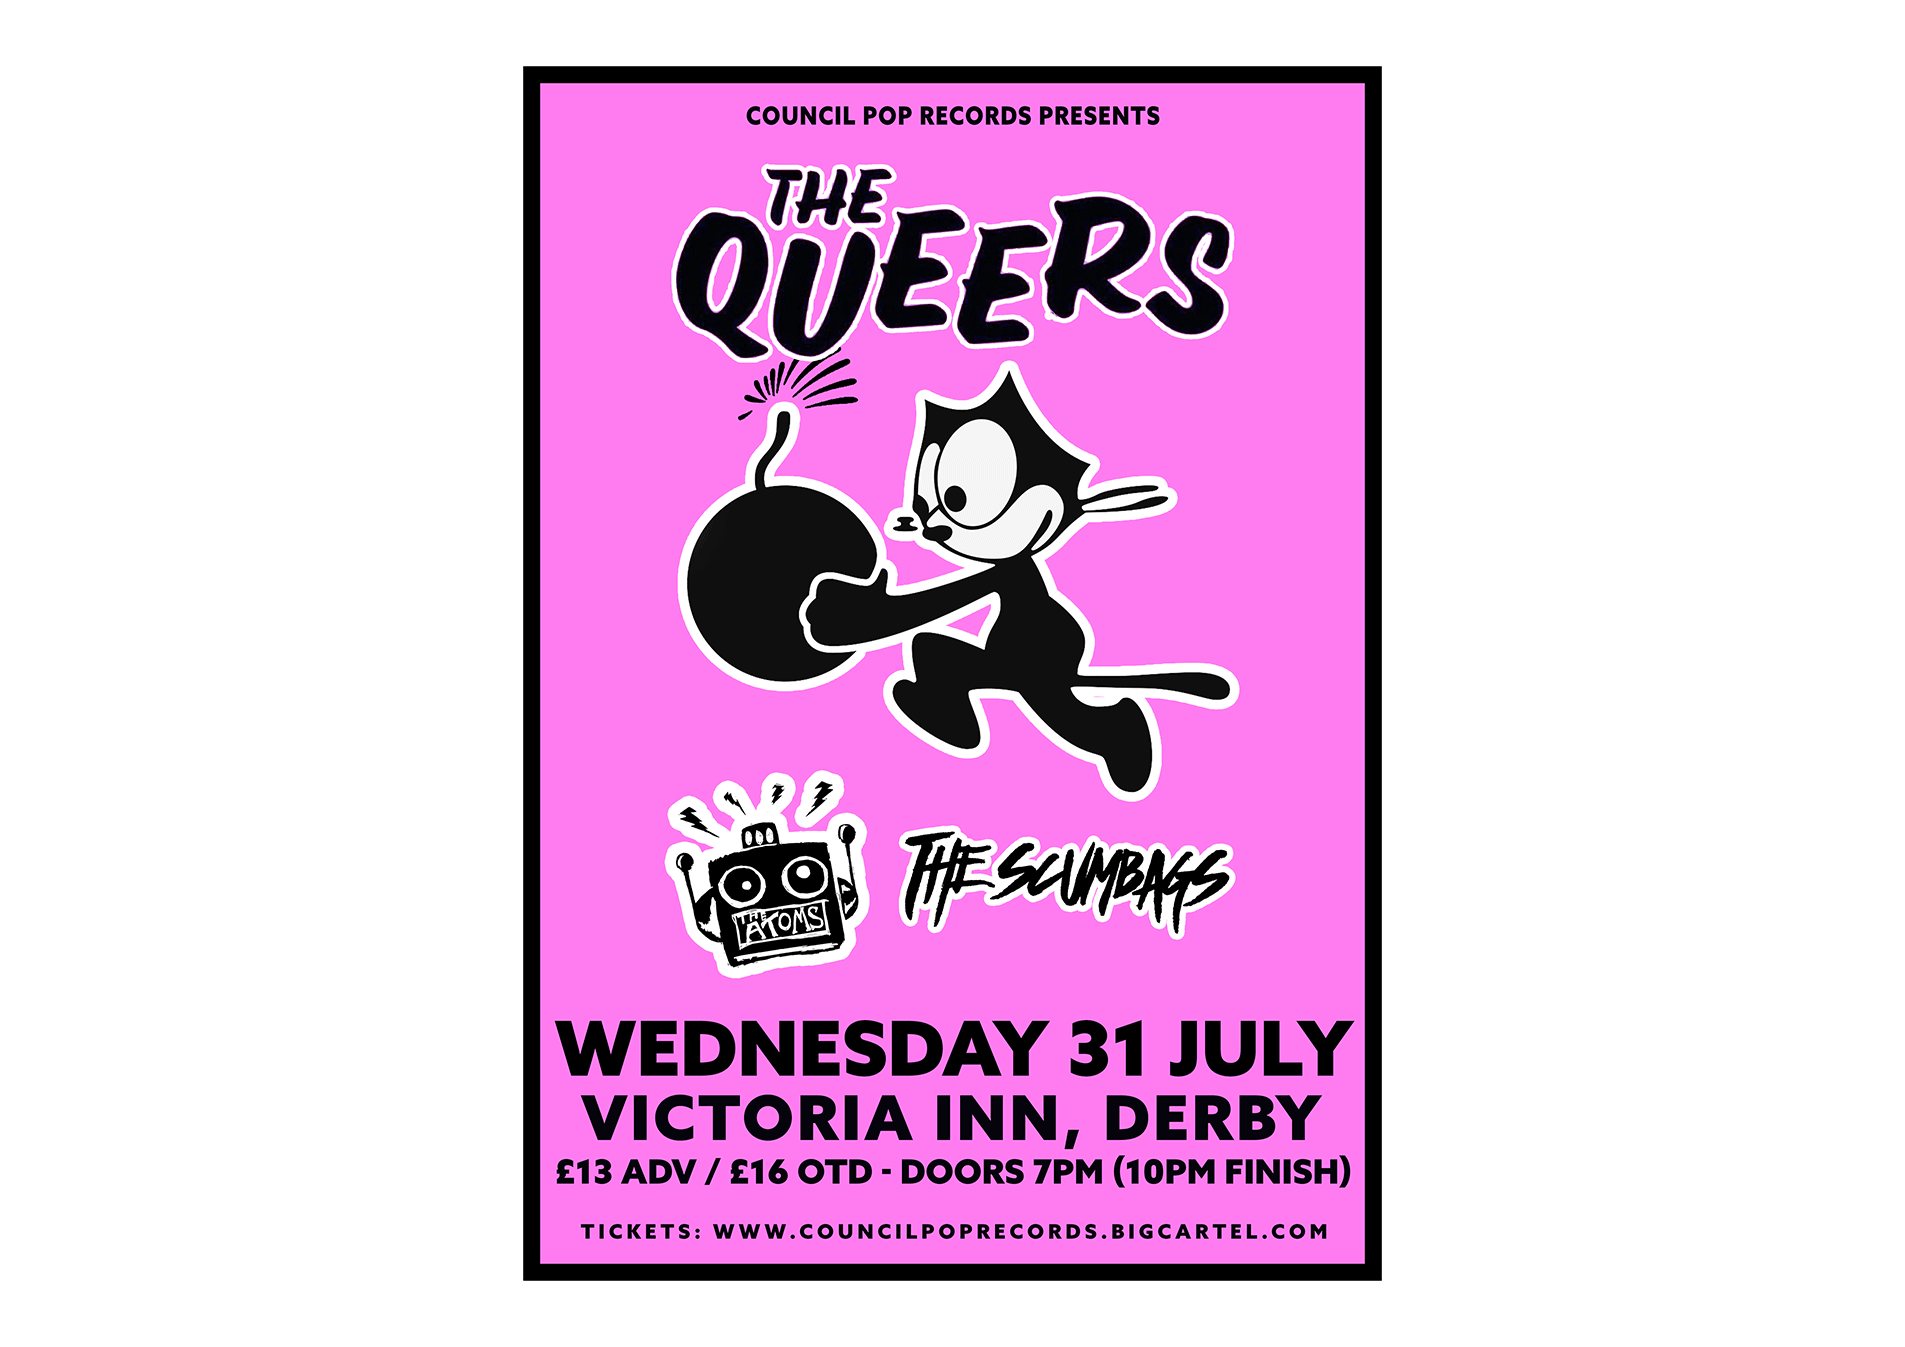 THE QUEERS FLYER band logo bands cat derby diy felix gig poster logo poster promo punk rock show the queers typography